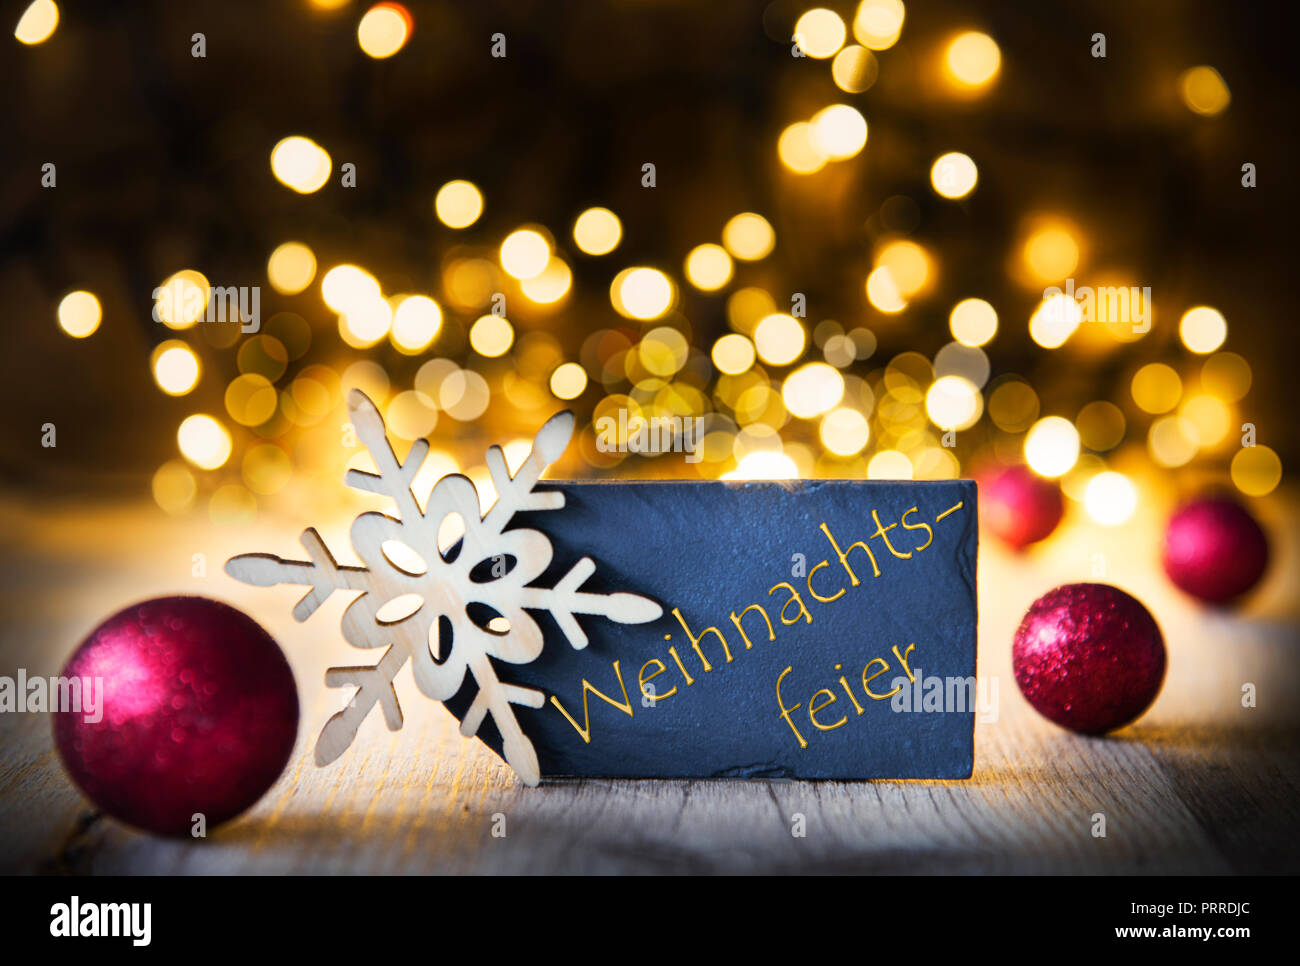 Background, Lights, Text Weihnachtsfeier Means Christmas Party Stock Photo